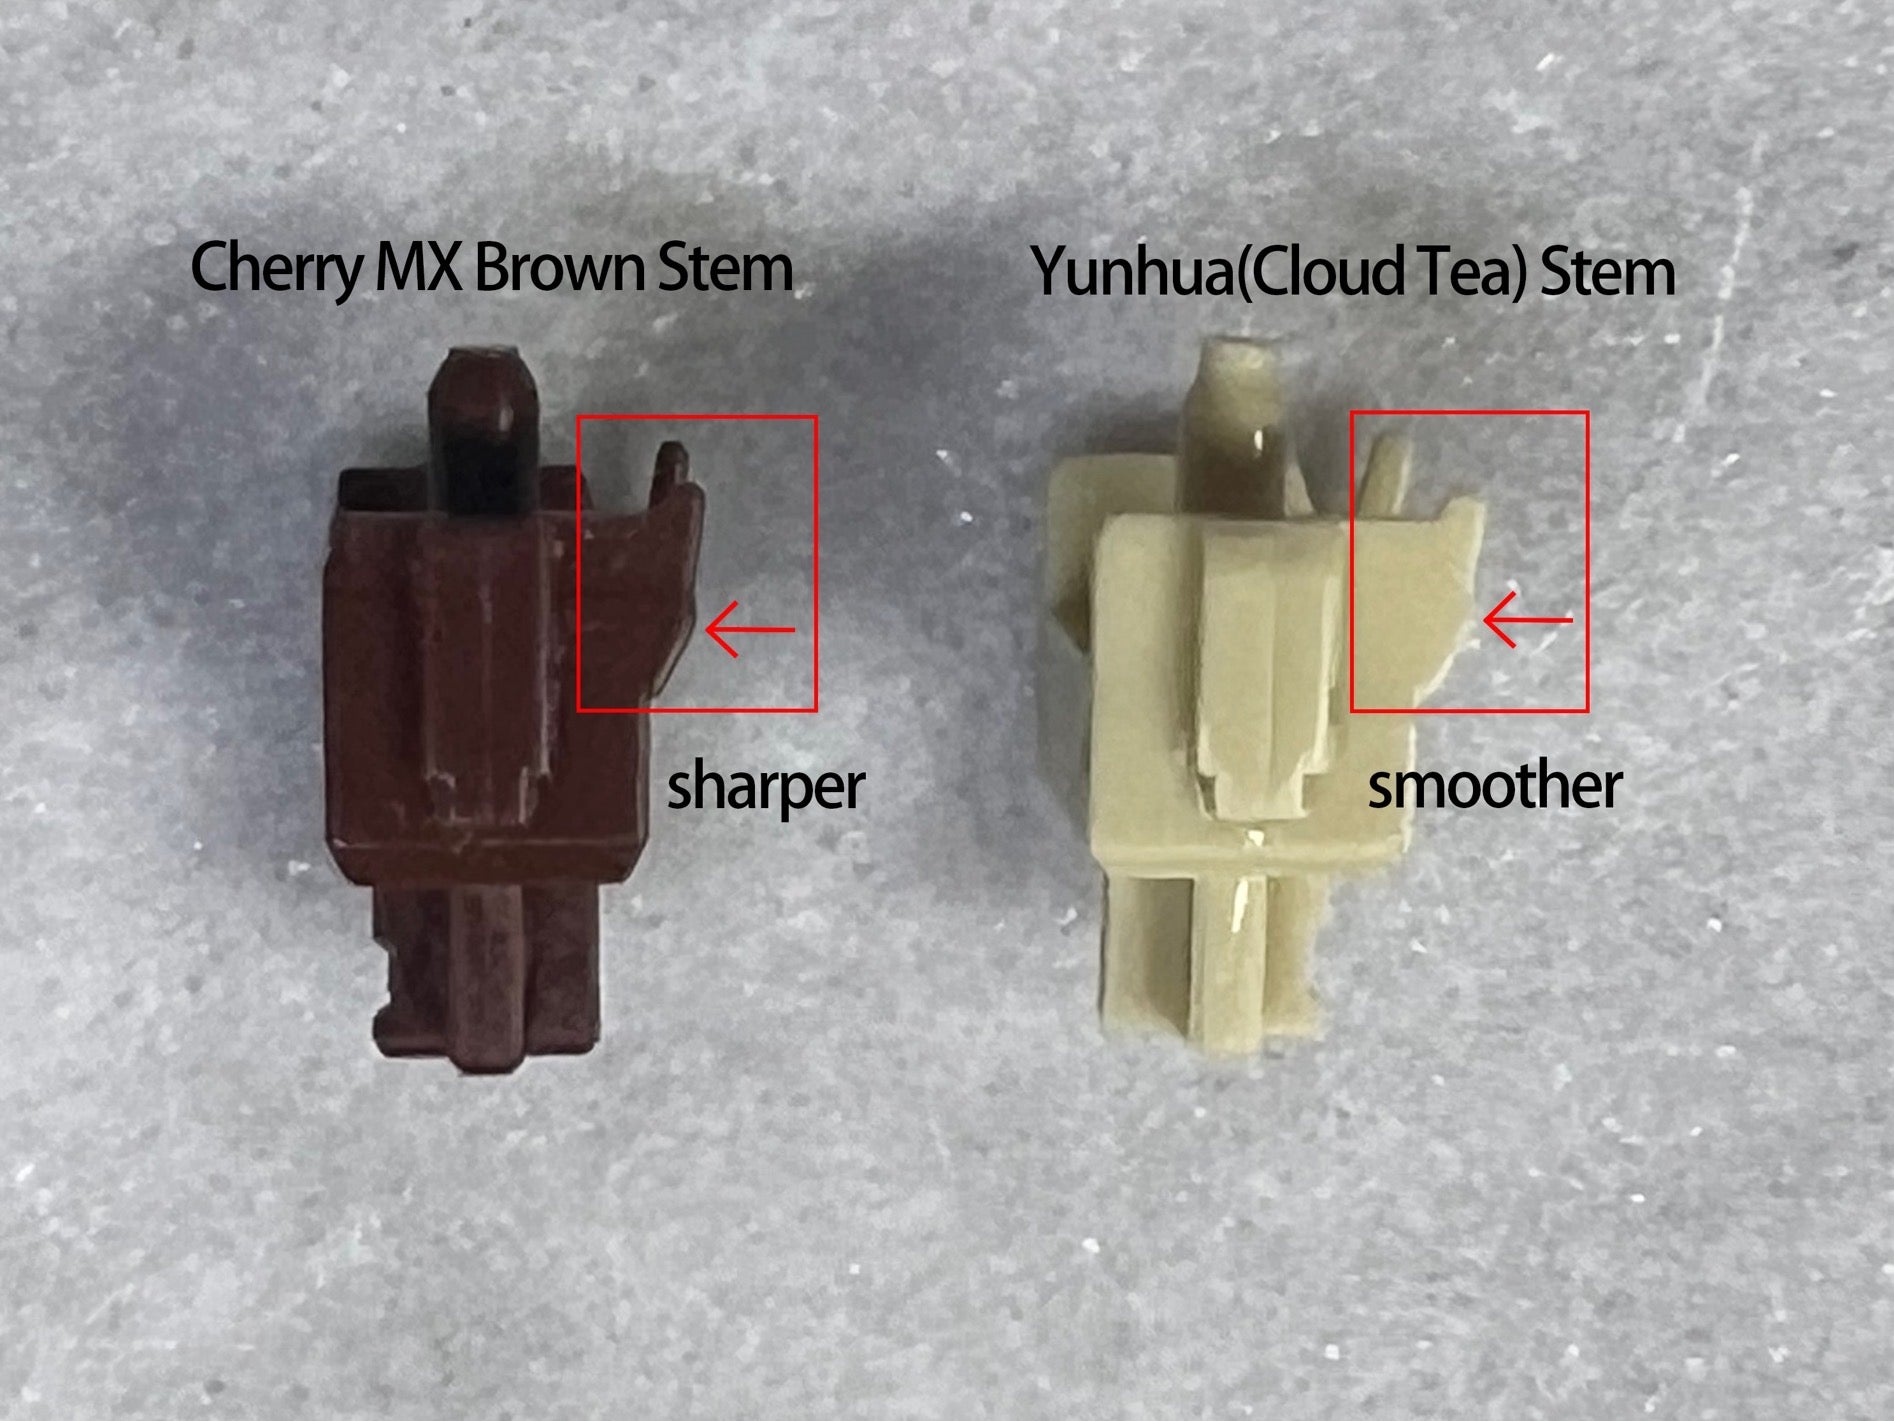 Smoother Tactile bumps on the Cloud Tea switches.